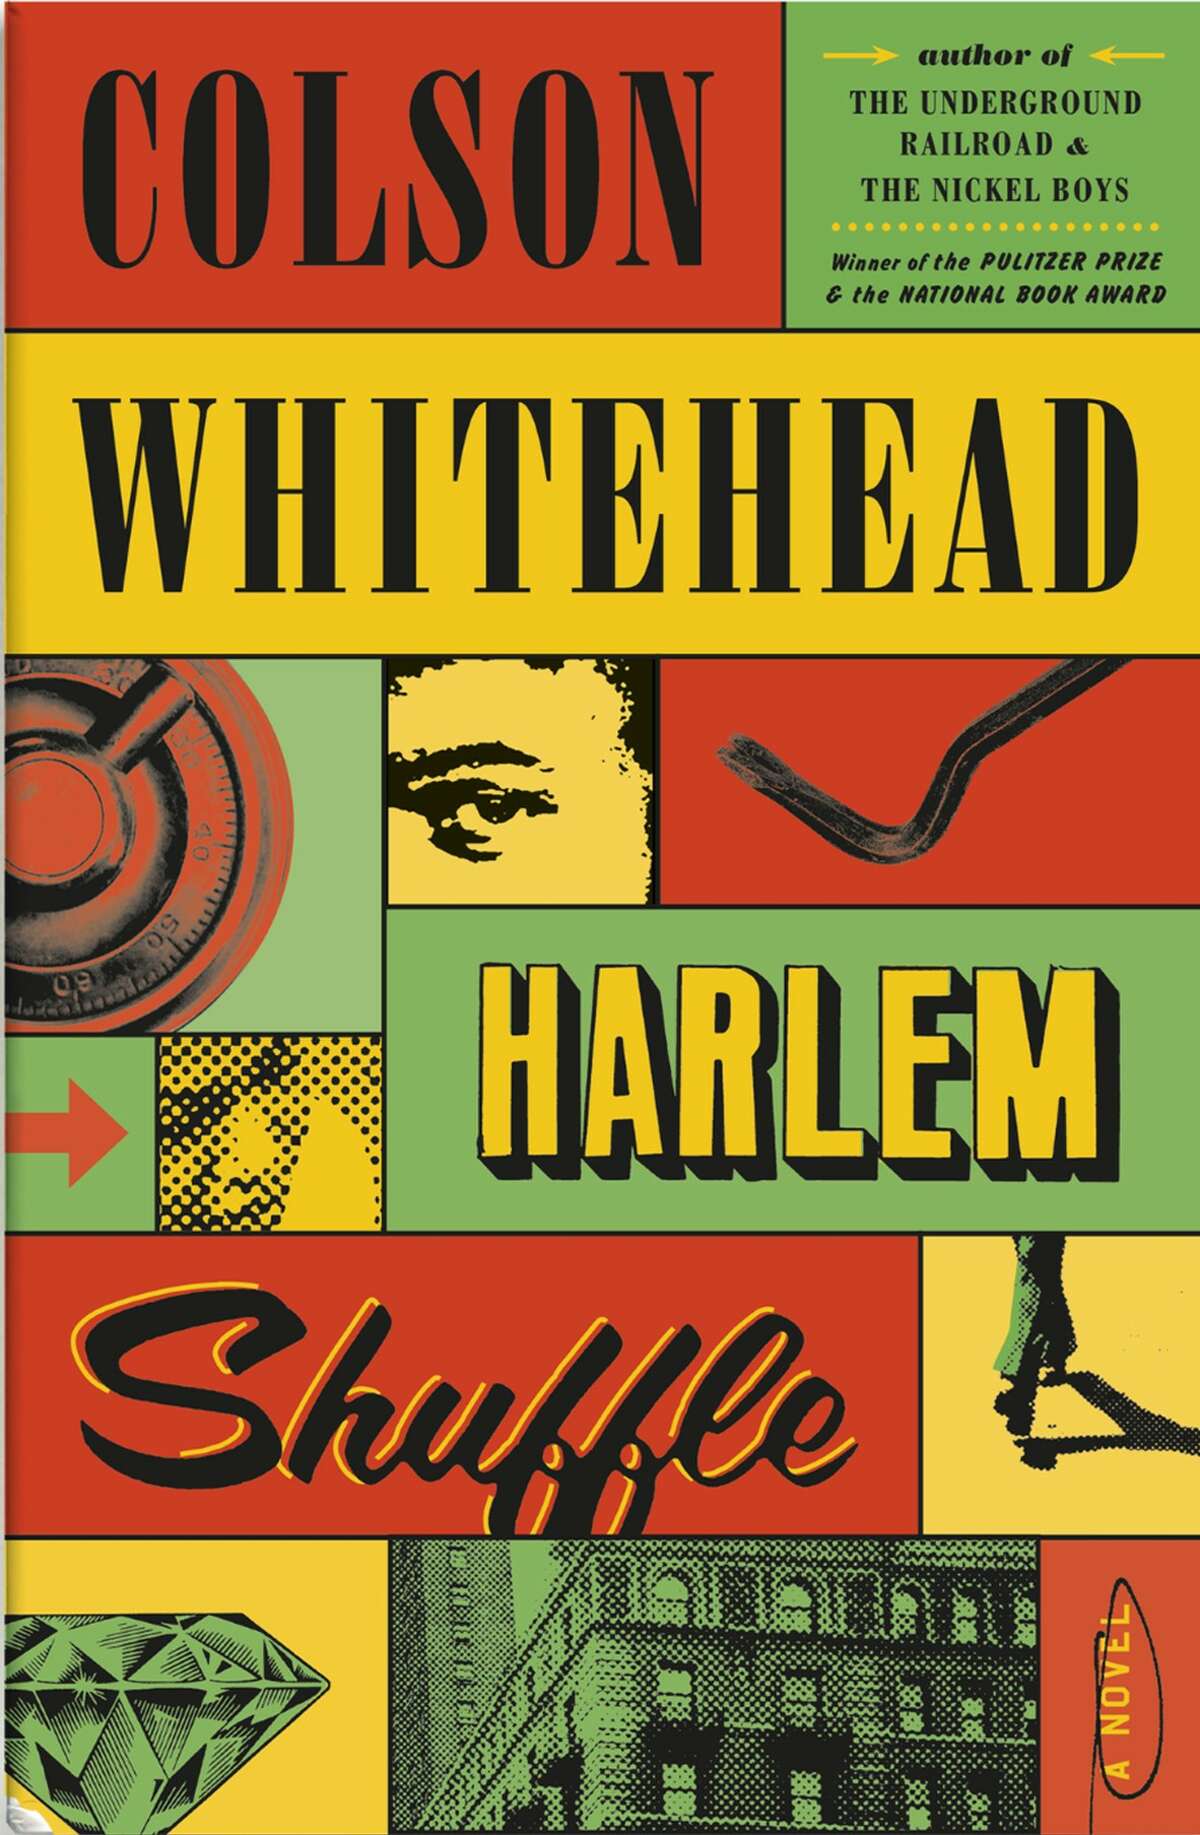 Gunn Memorial Library’s Fiction Book Club will be reading "Harlem Shuffle" by Colson Whitehead for the month of February.